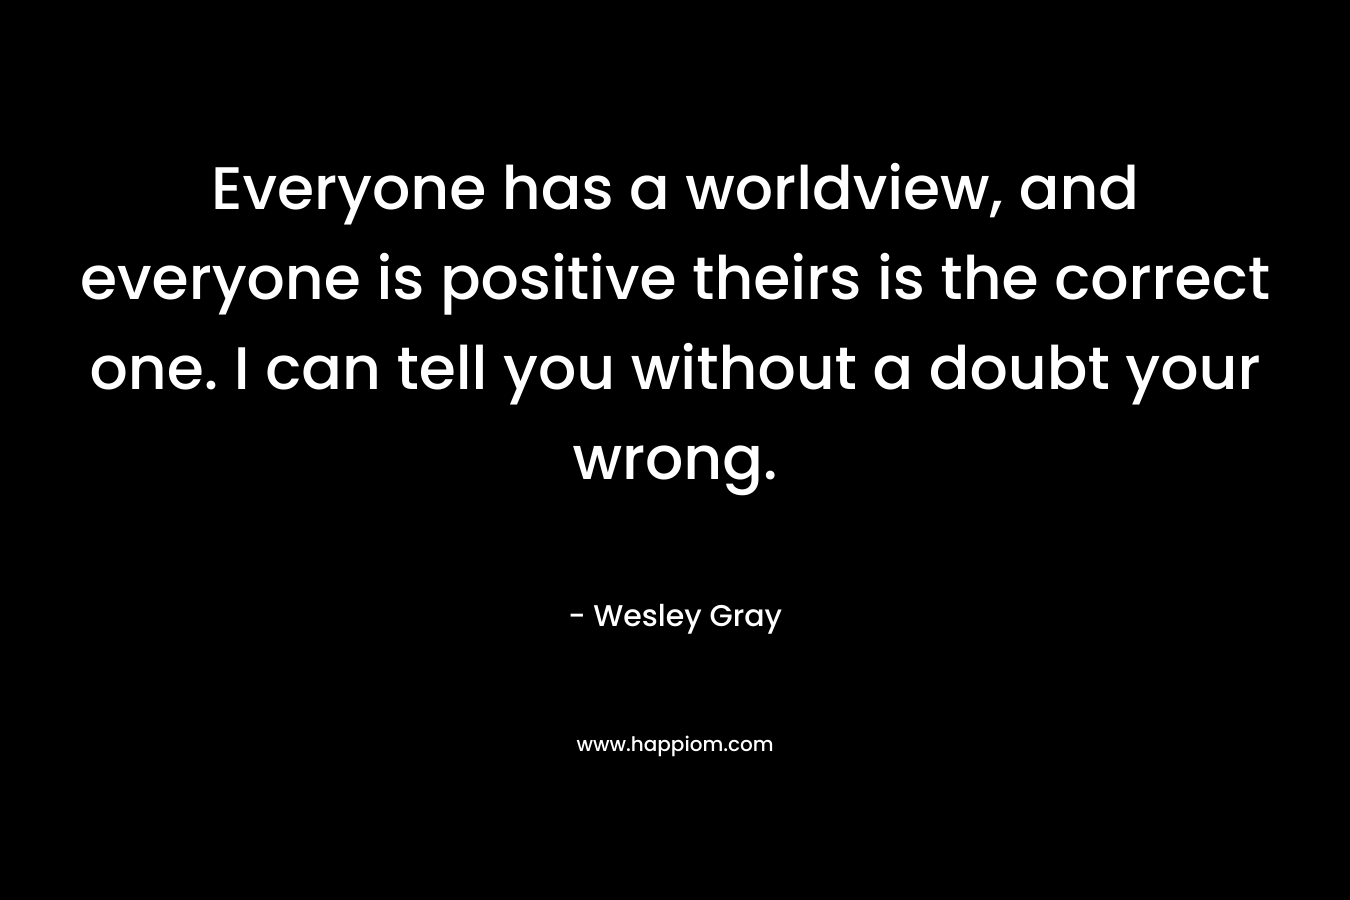 Everyone has a worldview, and everyone is positive theirs is the correct one. I can tell you without a doubt your wrong.